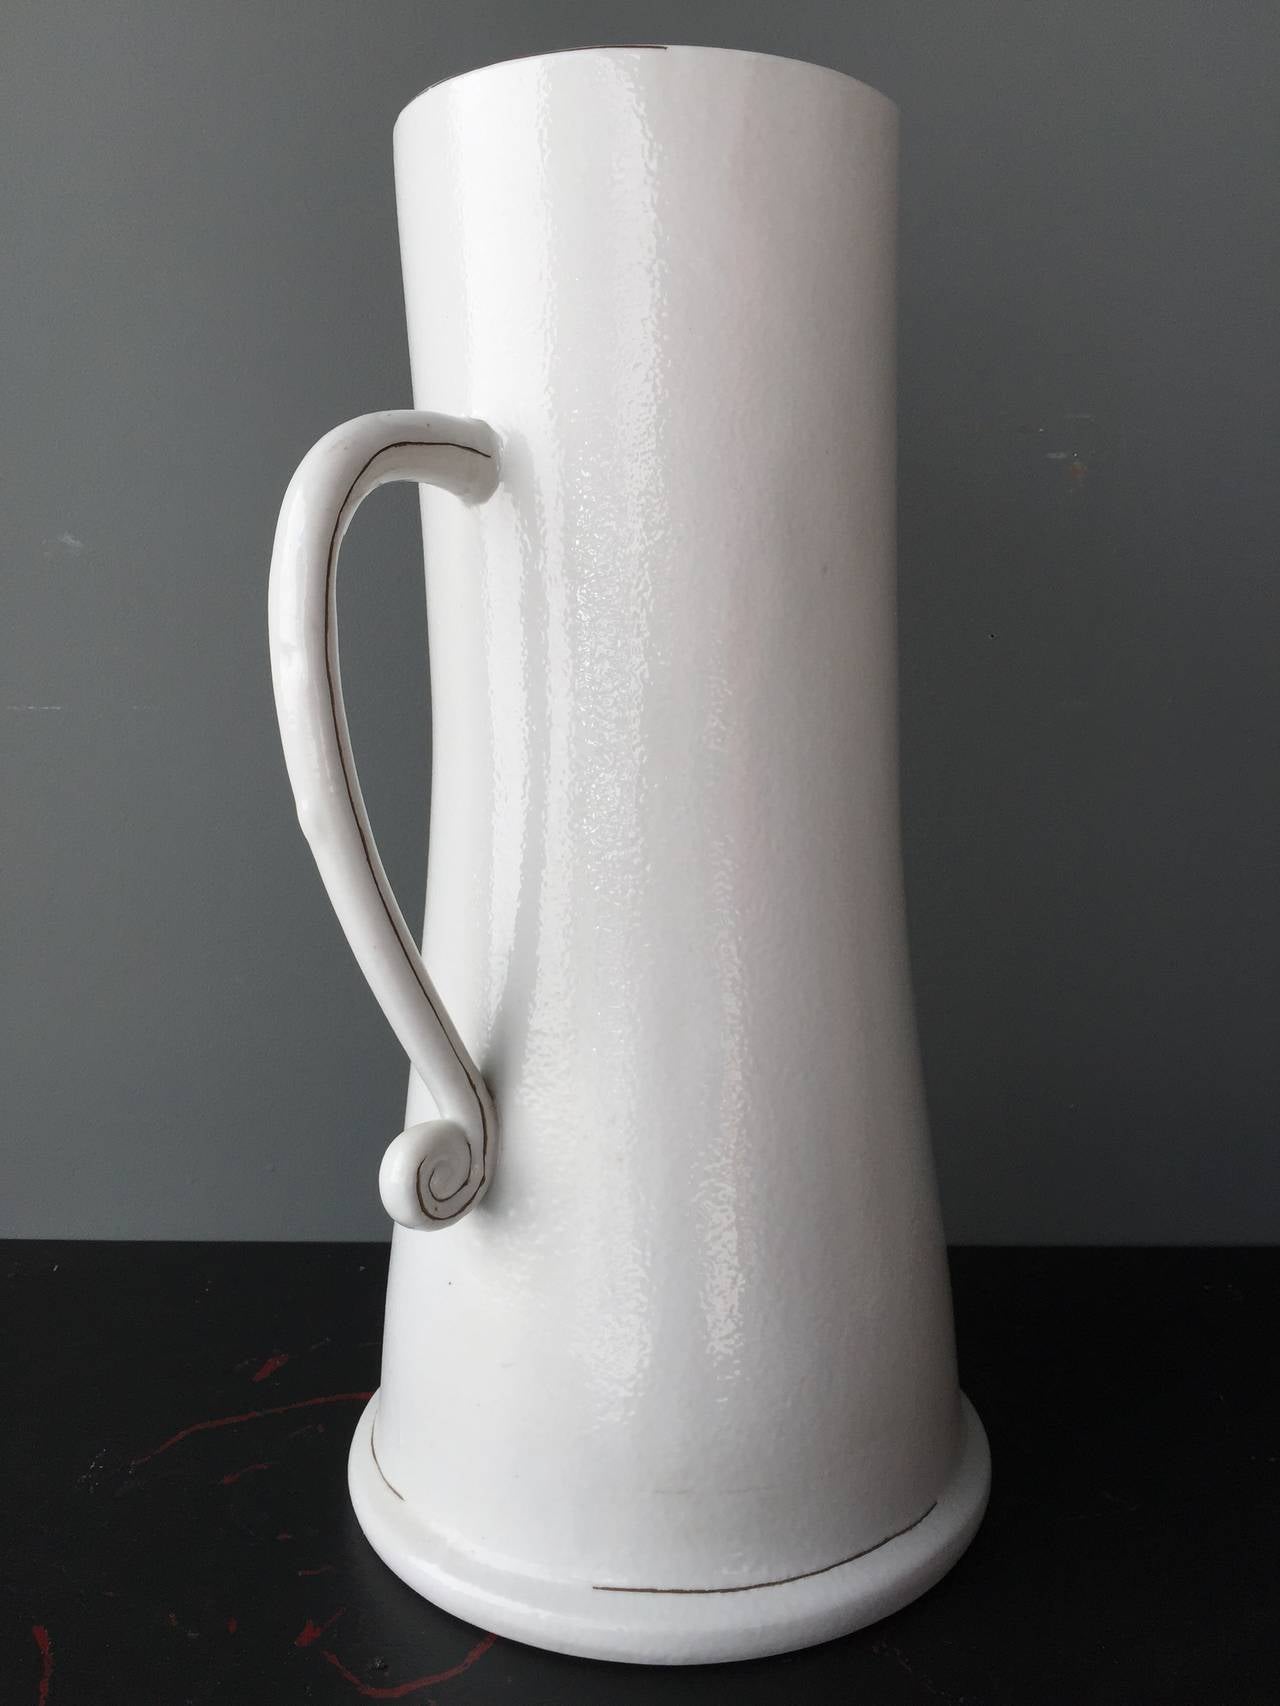 Place this on the floor with umbrellas or on the table with cream - either way it is a totally gorgeous object.  This possible Italian or French ironstone pitcher form has wonderful scale.  There's a great line detail painted on the foot, handle and